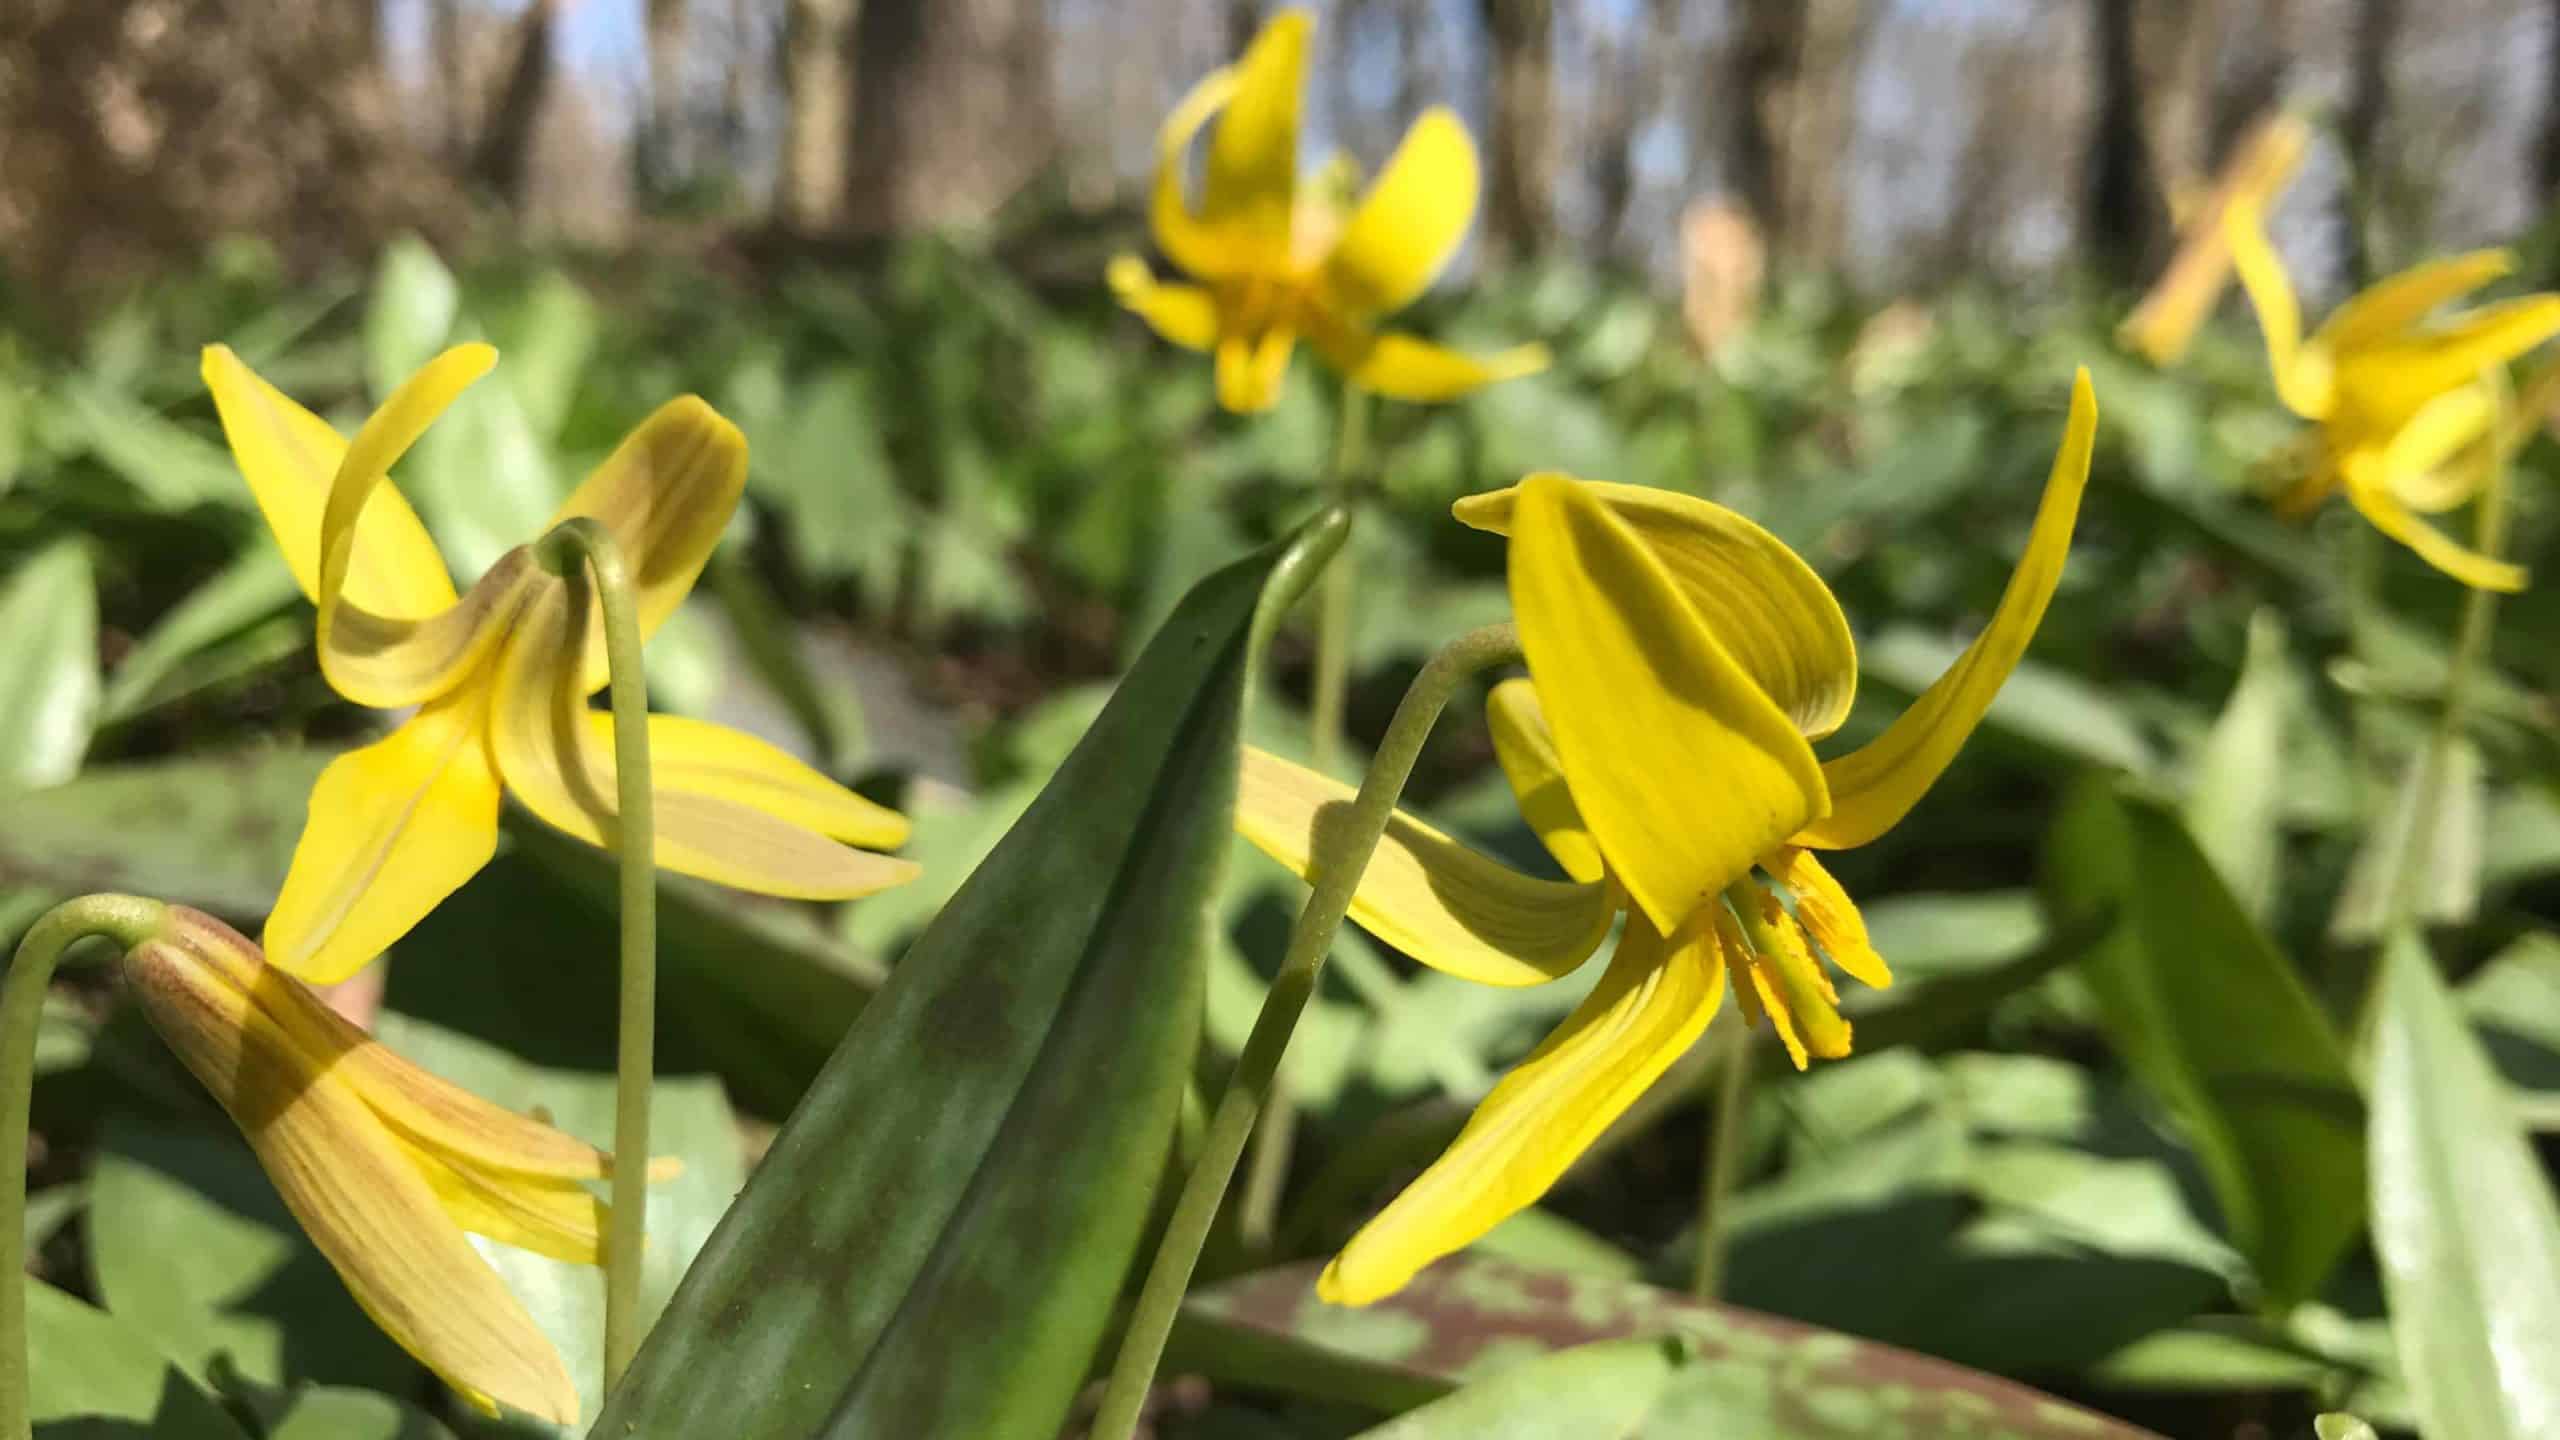 Trout lilies bloom in their hundreds on the Taconic Crest Trail.